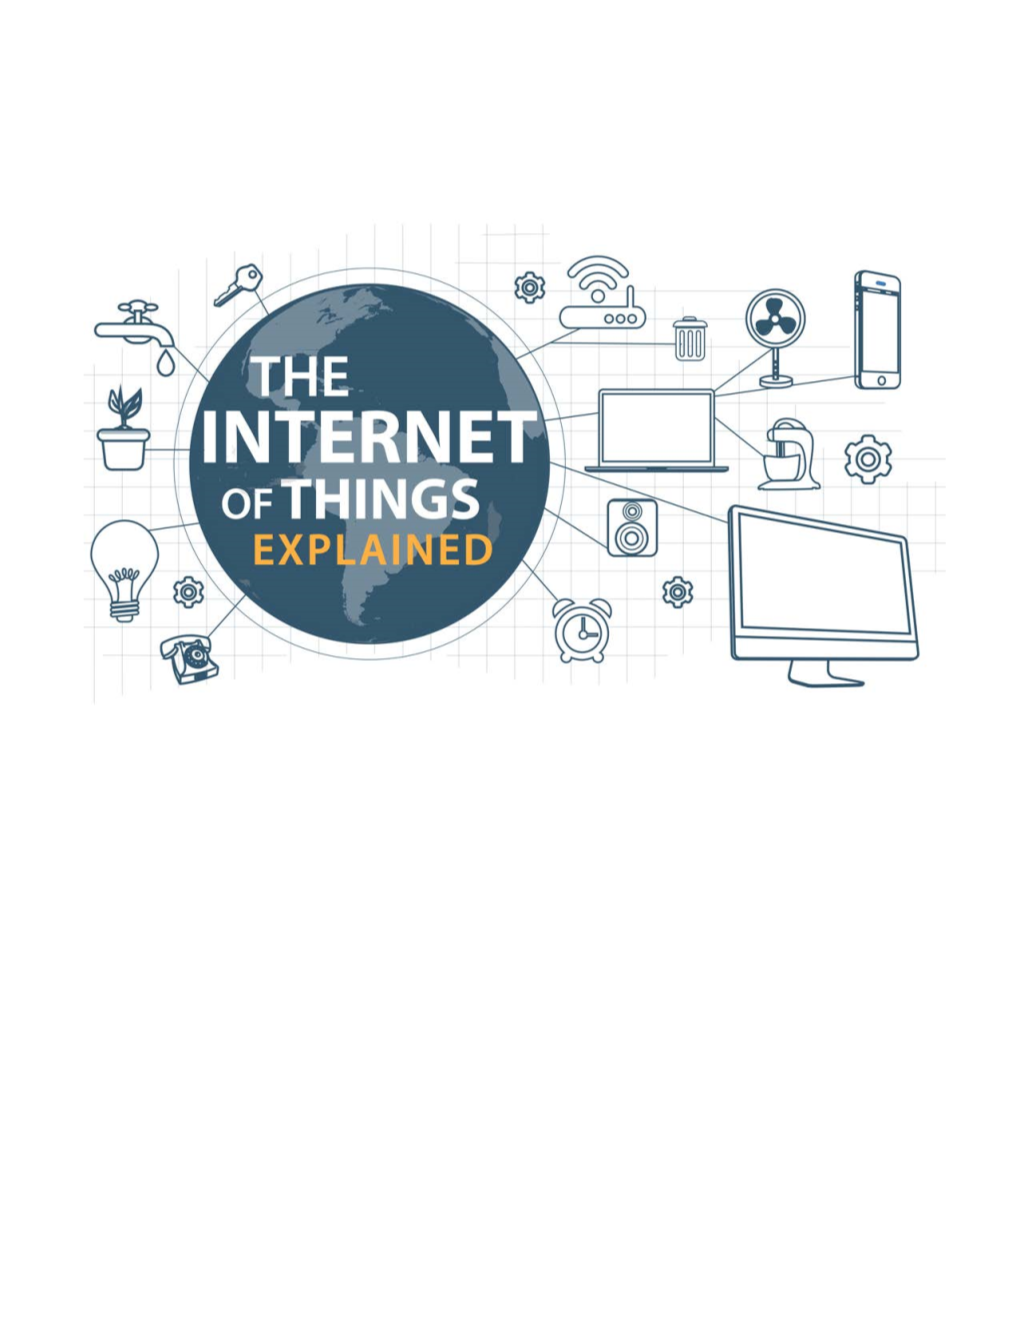 So Why Should Operators Care About the Iot?